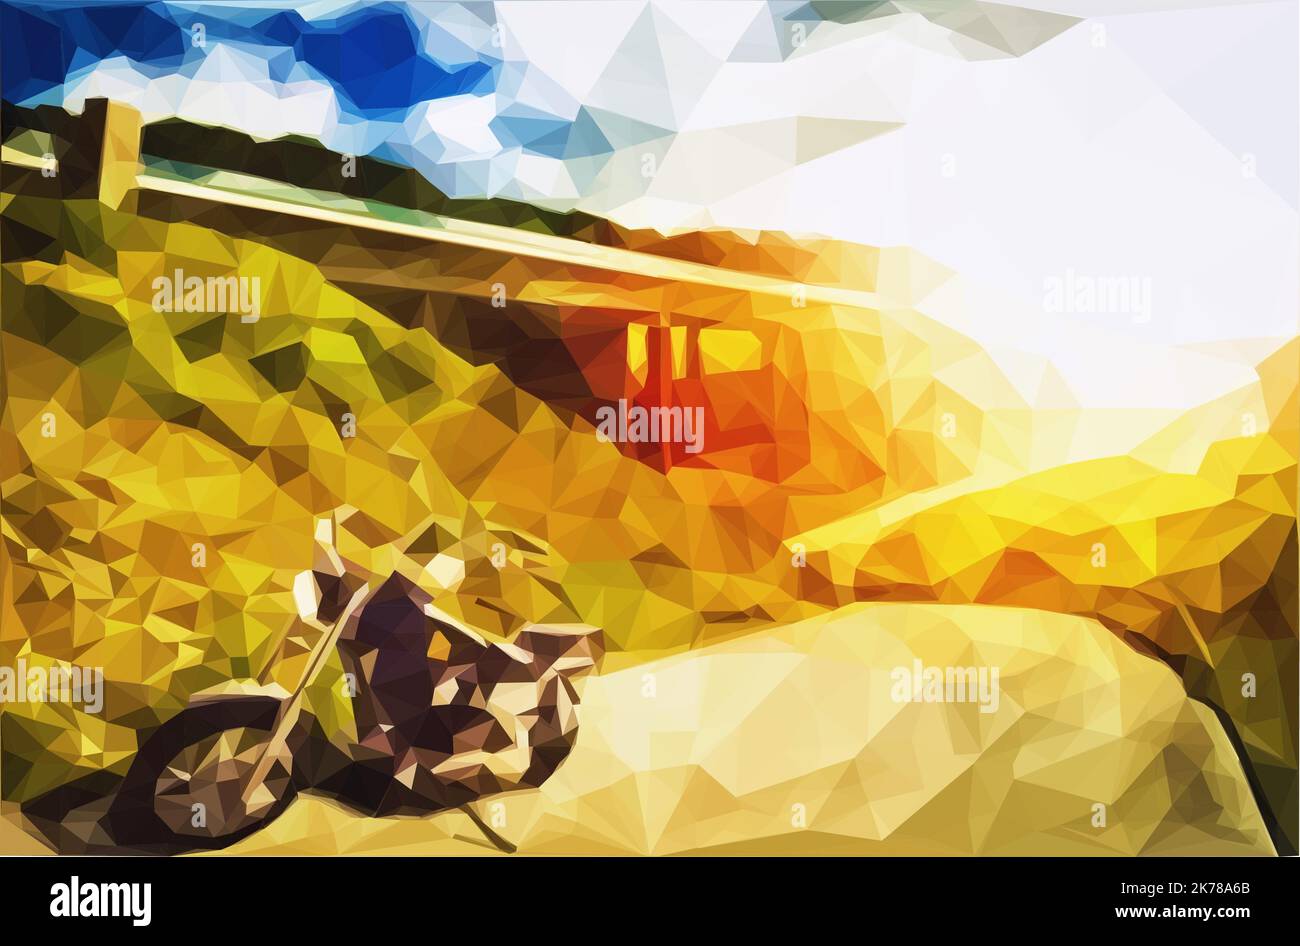 Polygenes form an adventurous landscape with a motorbike in the foreground. Motorway bridge at sunset. Concept image for the dream of freedom with a m Stock Vector